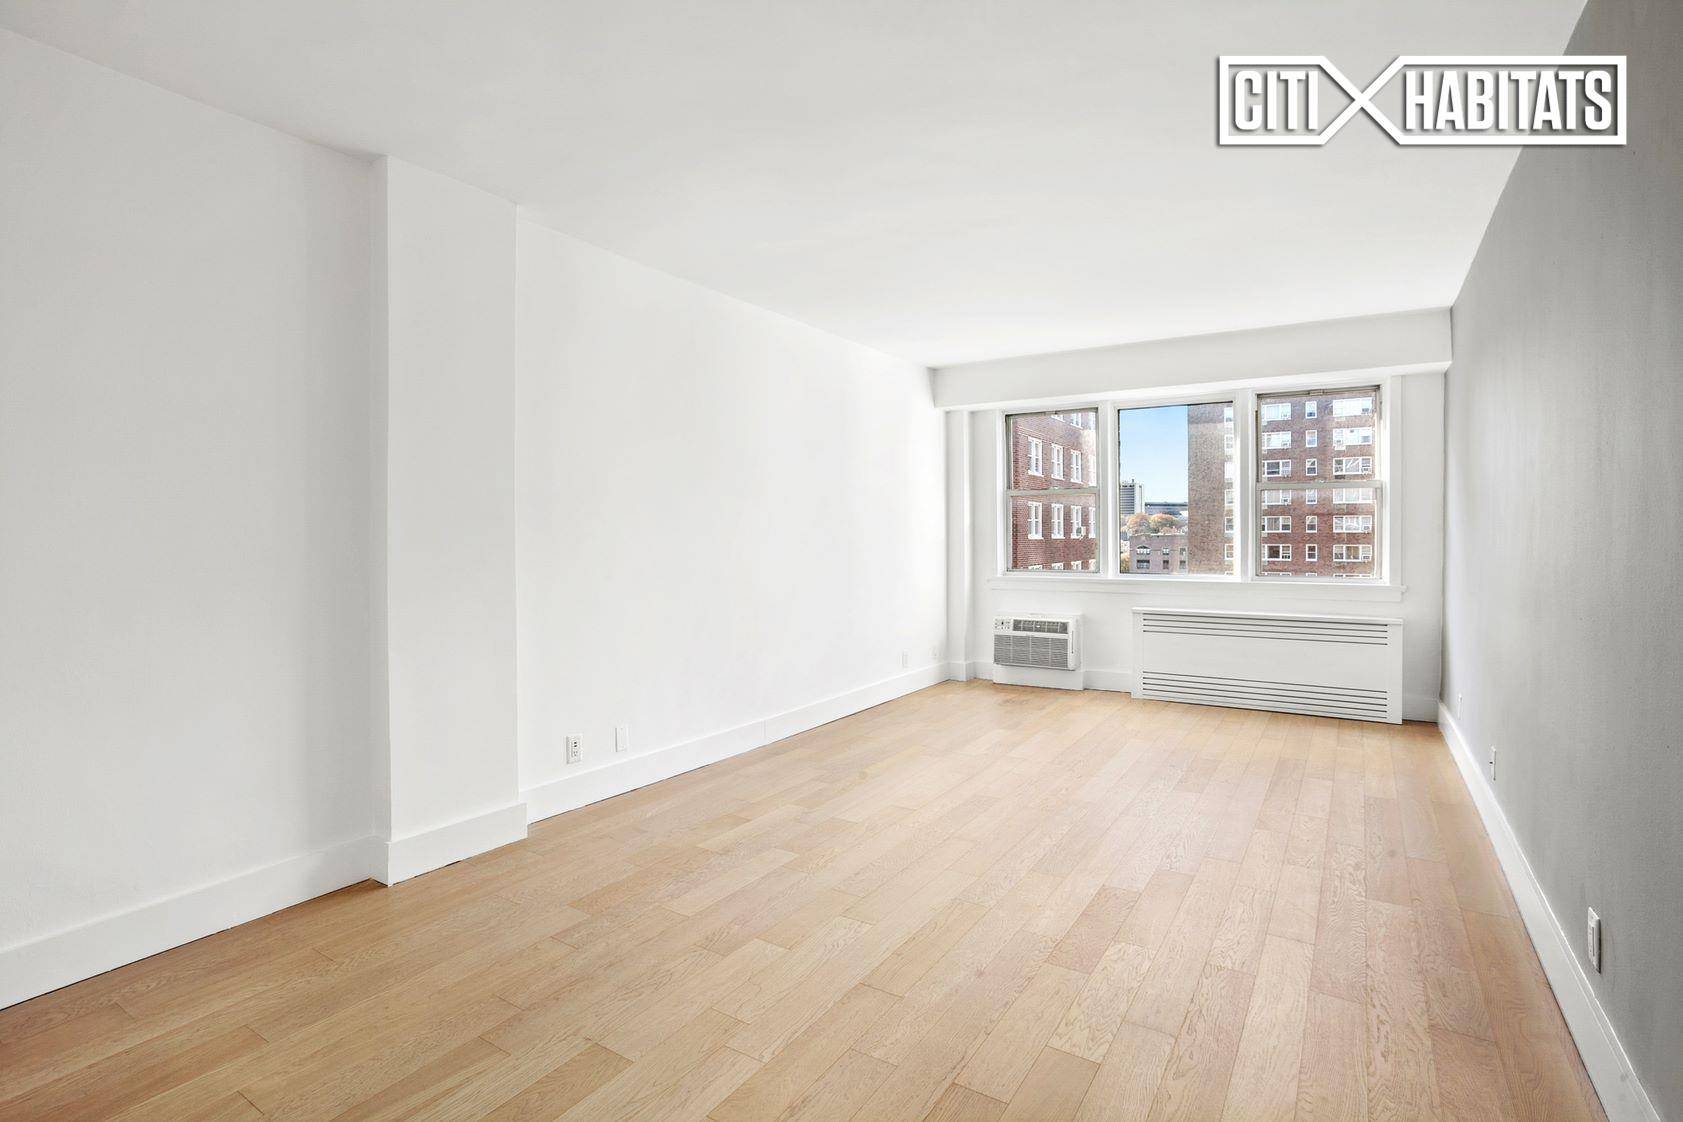 NO FEE ! This roomy 2 bedroom apartment is available for rent in Central Harlem.